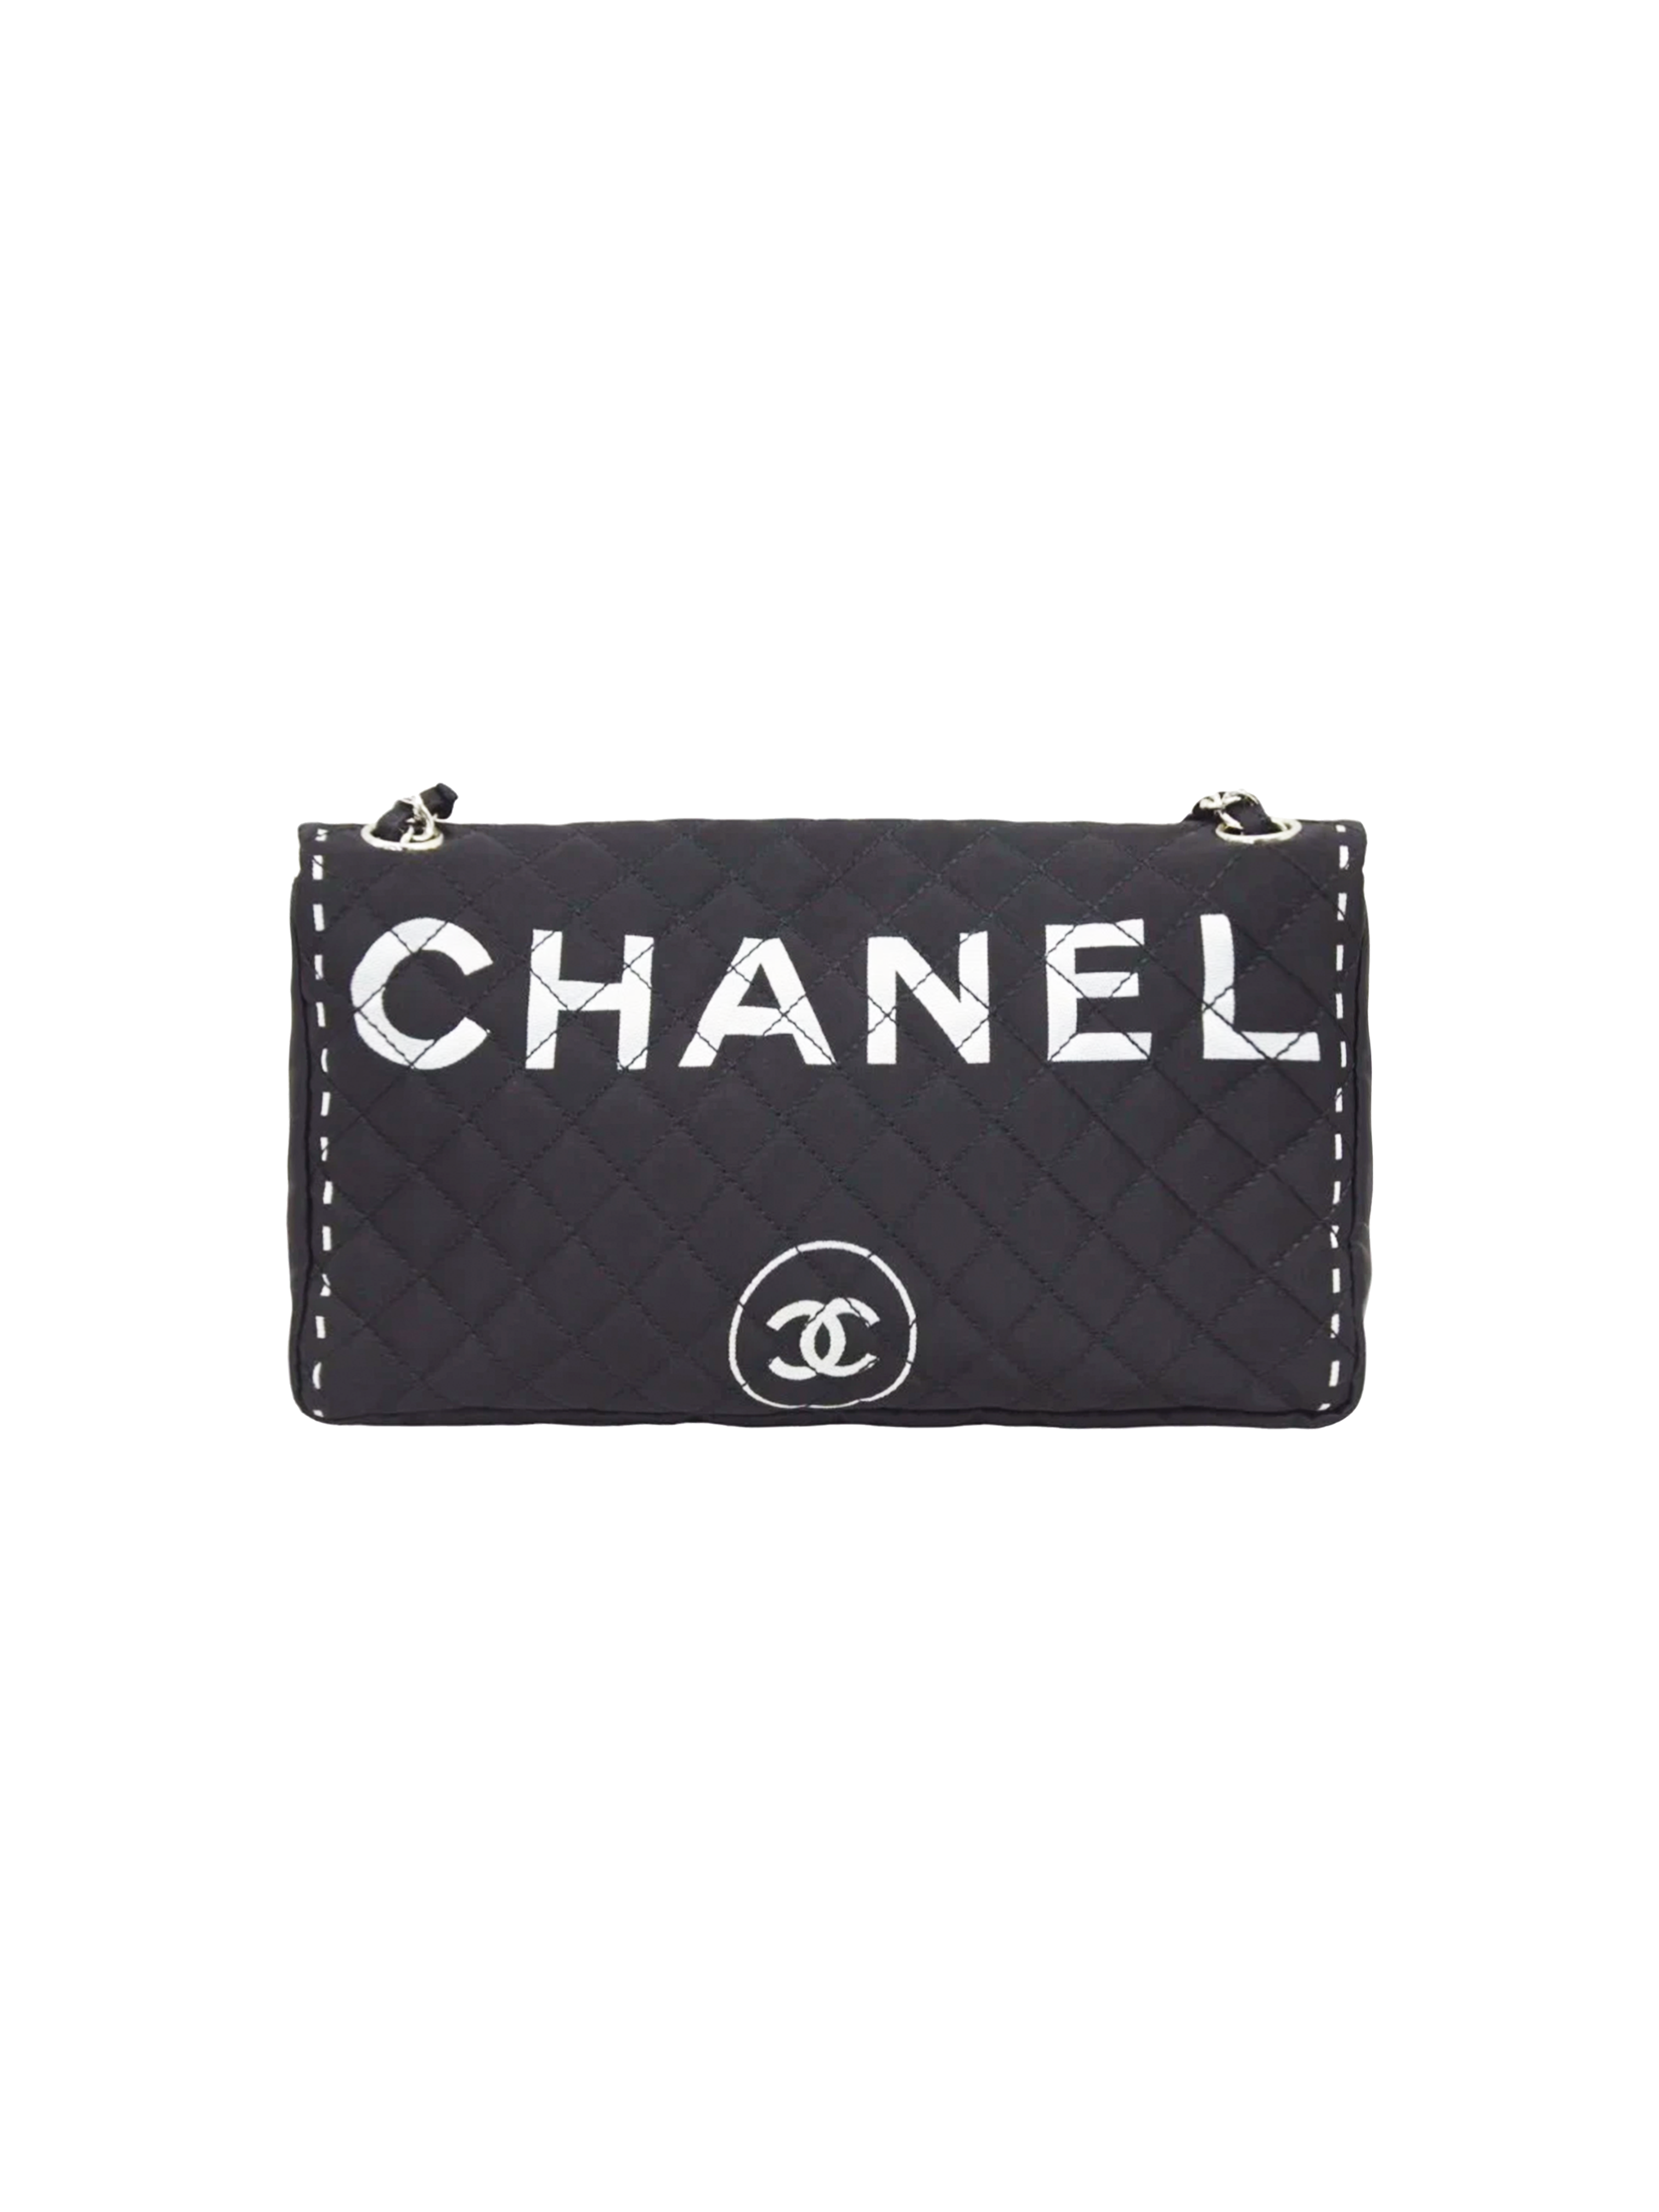 Chanel 2000s Extremely Rare Black CC Flap Bag